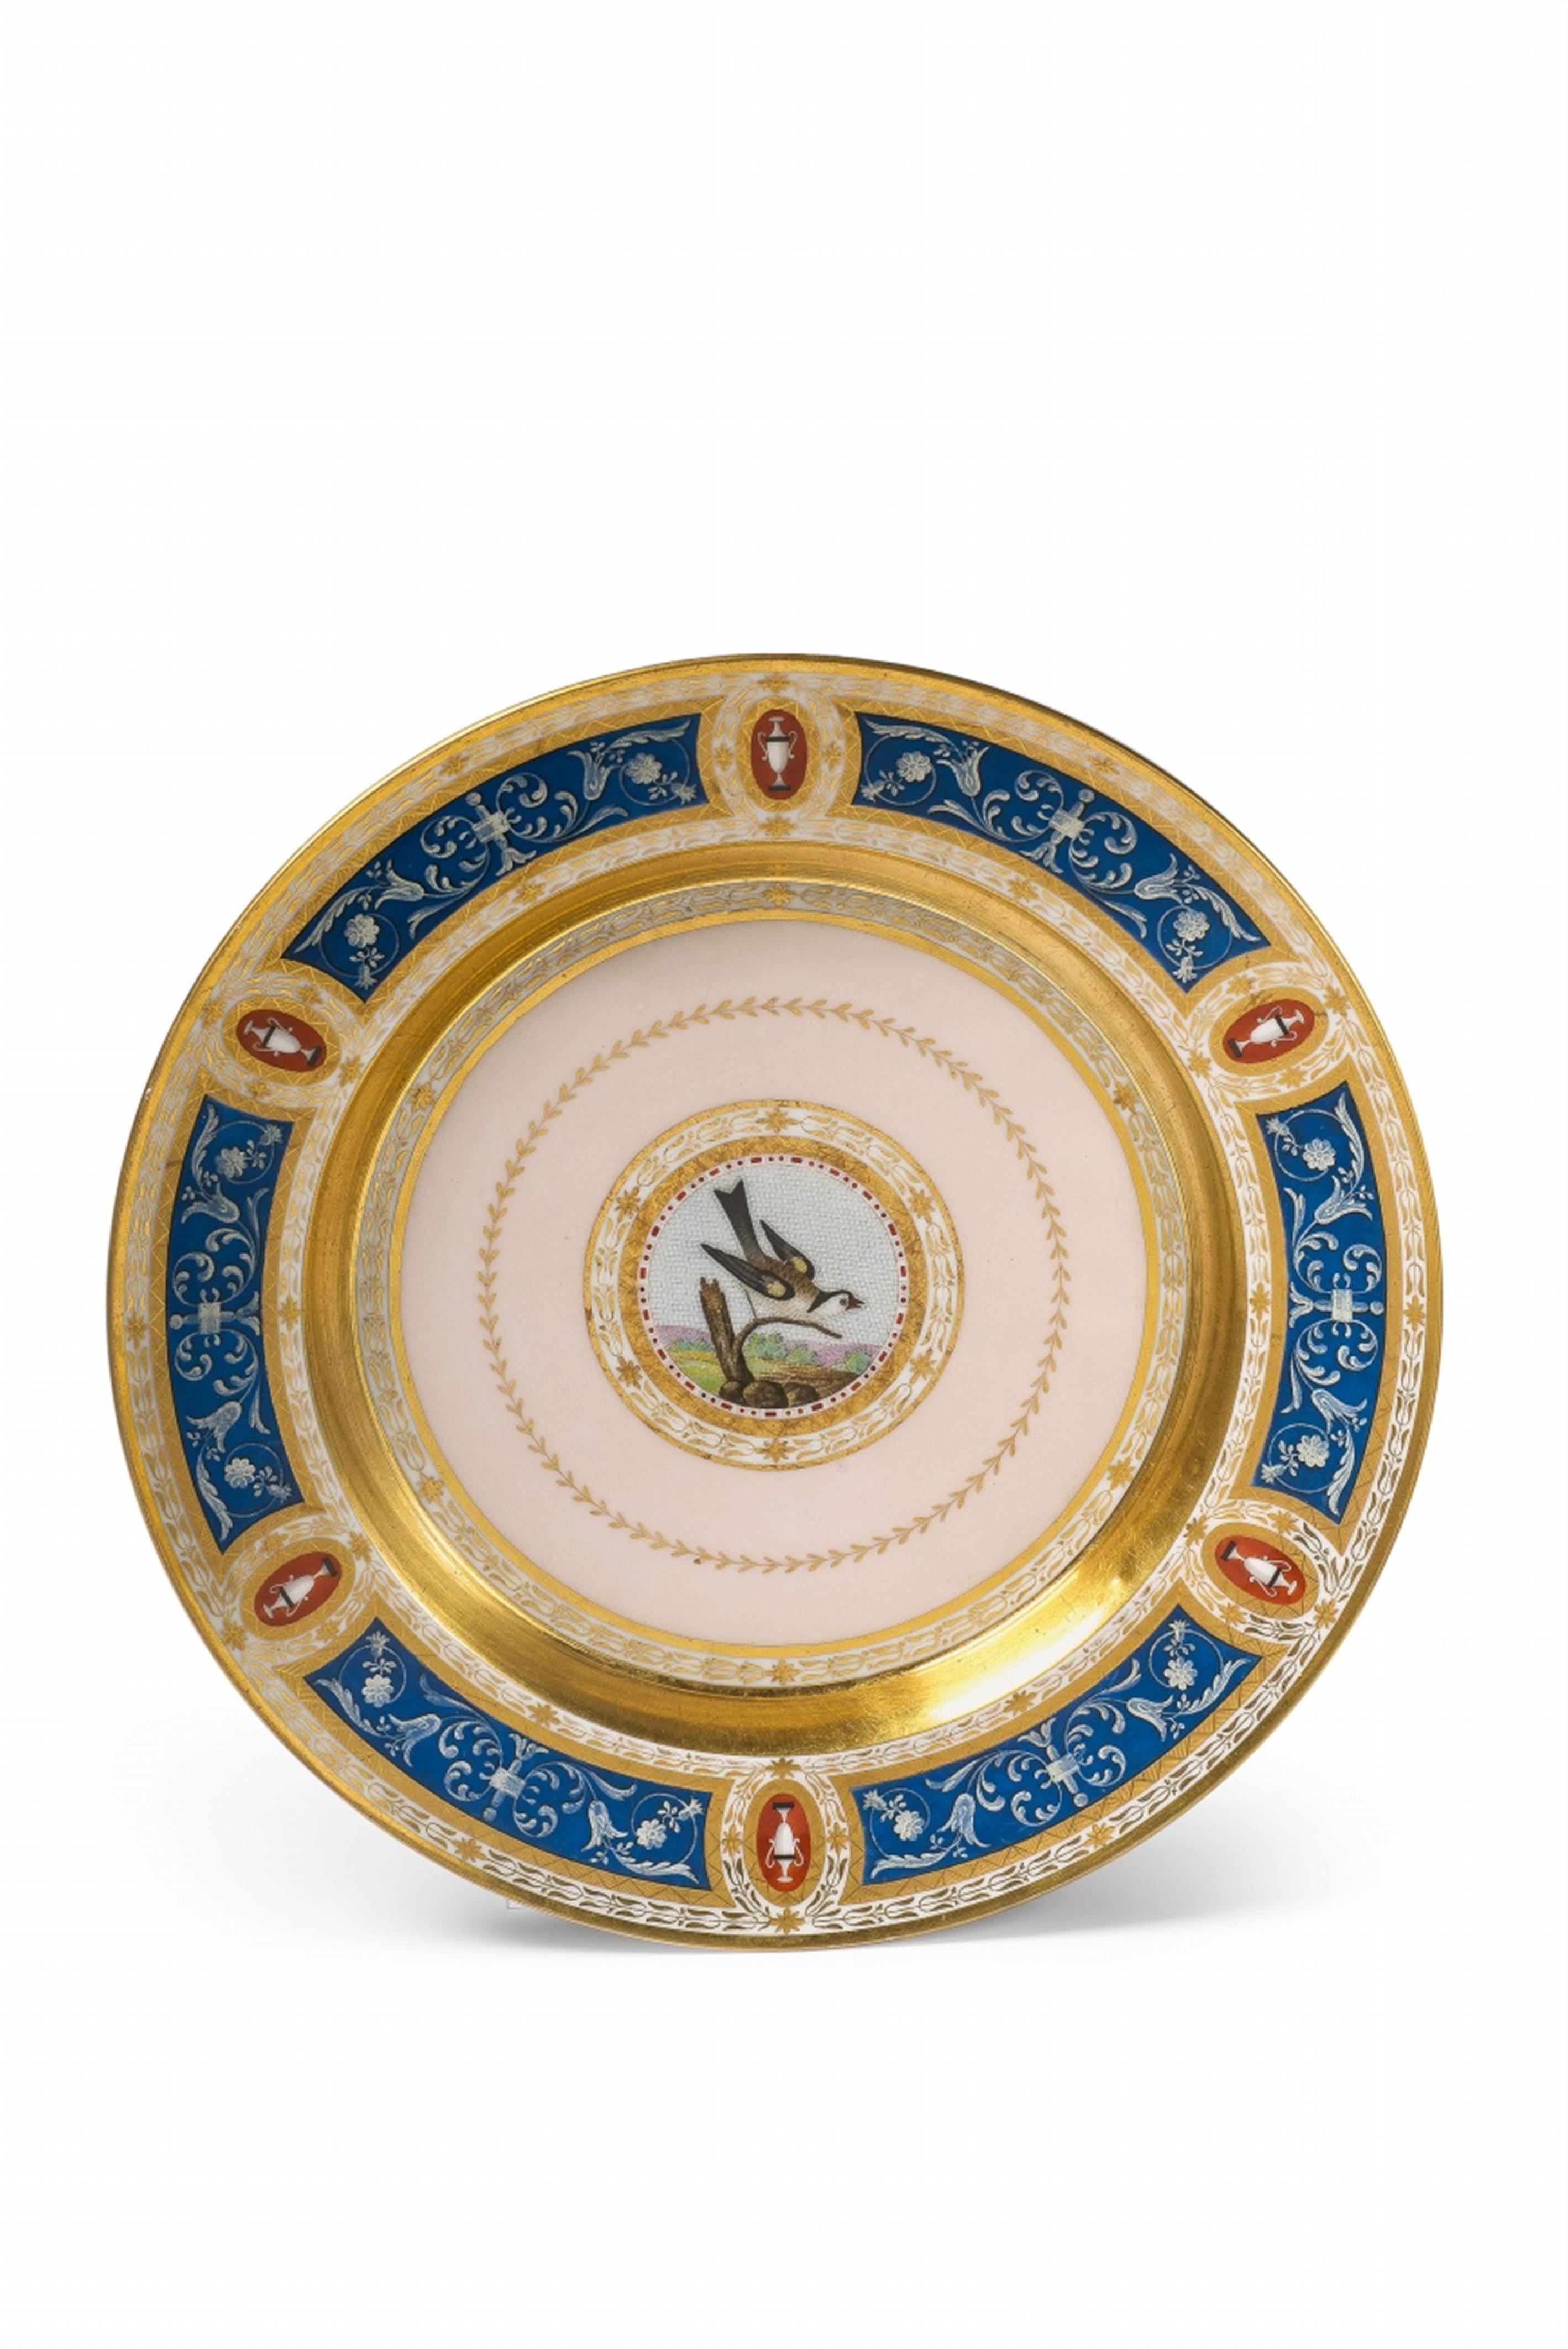 A Berlin KPM porcelain plate with a painted micromosaic bird - image-1